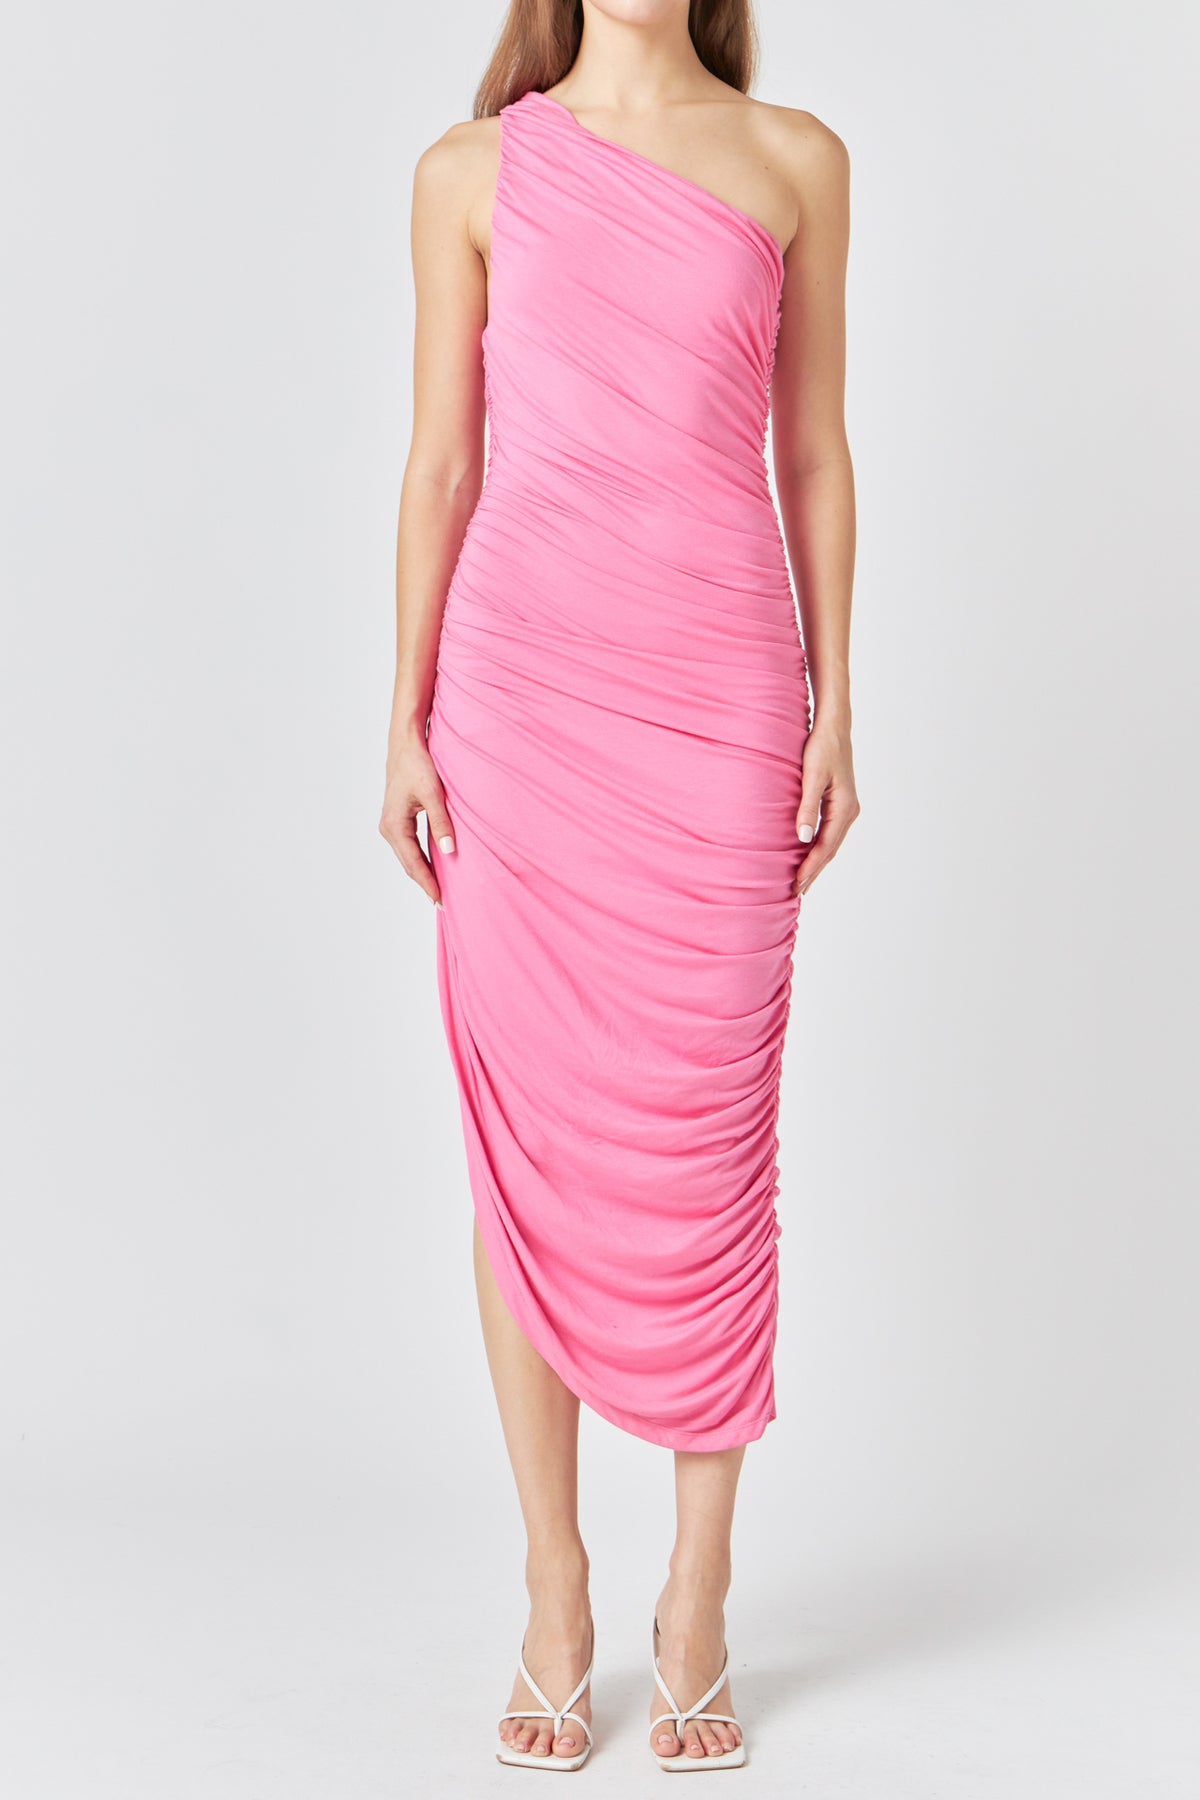 ENDLESS ROSE - Asymmetrical Jersey Dress - DRESSES available at Objectrare